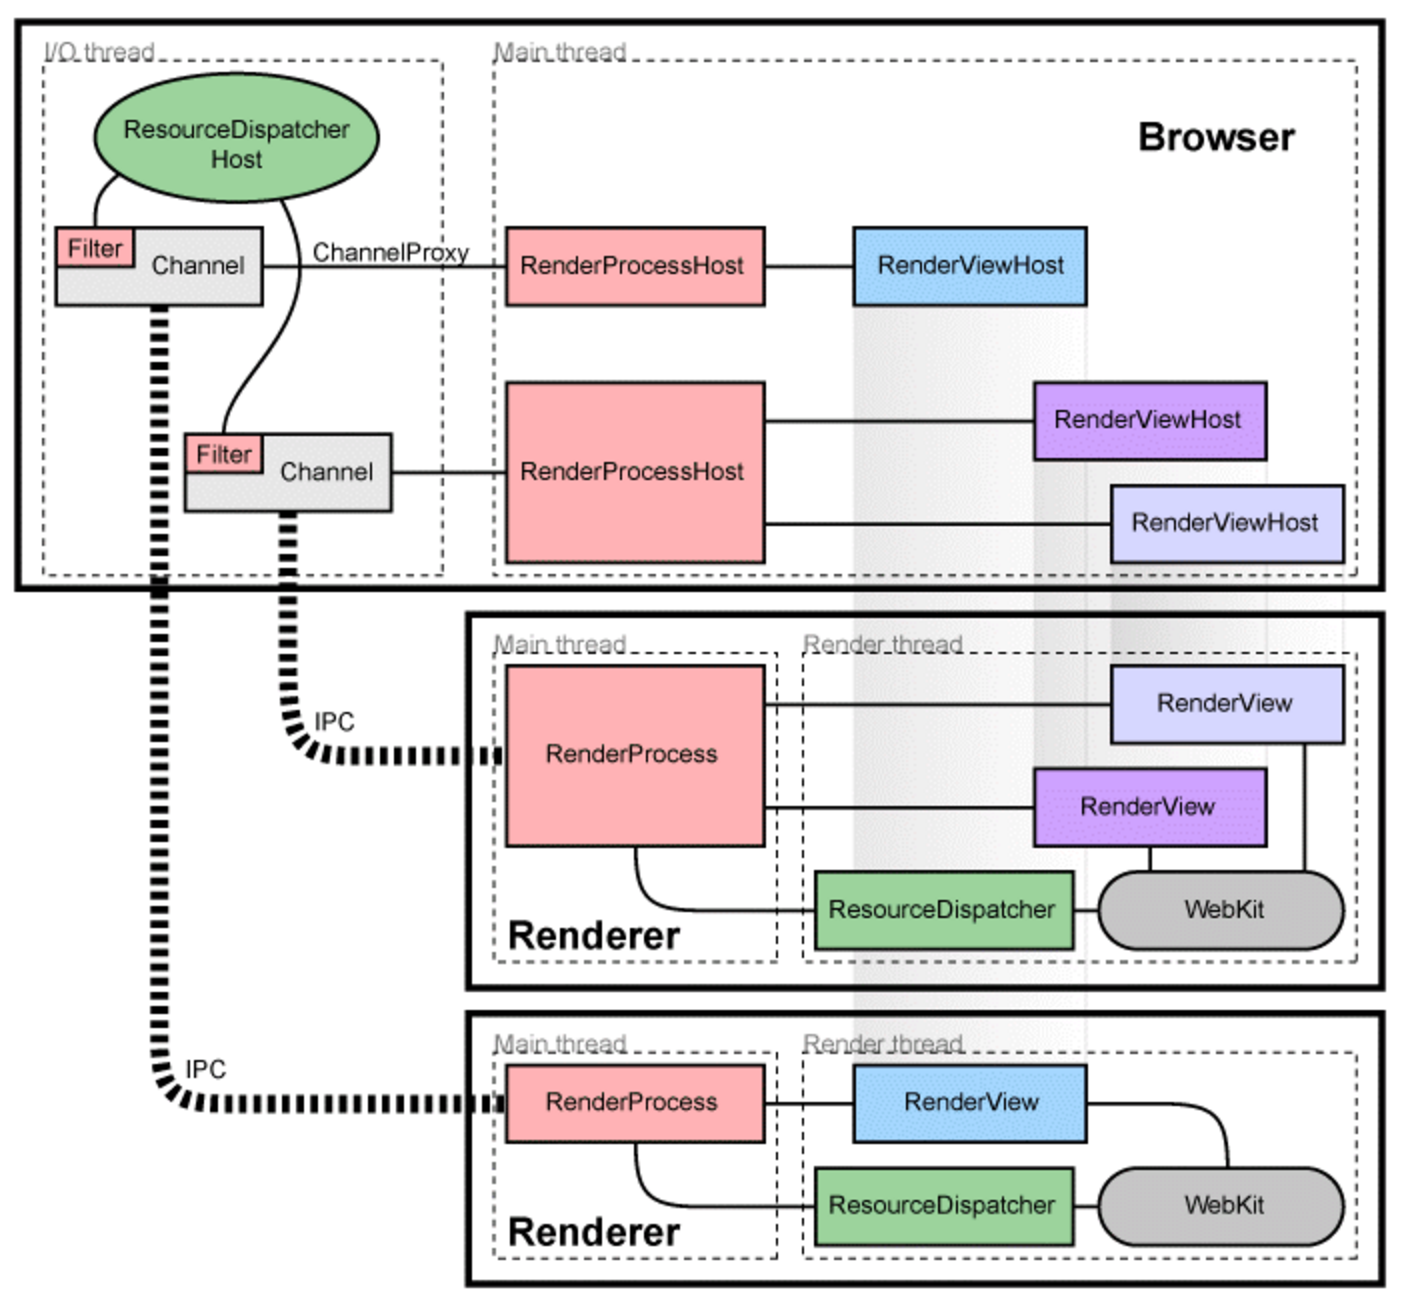 Architectural overview of browser threads